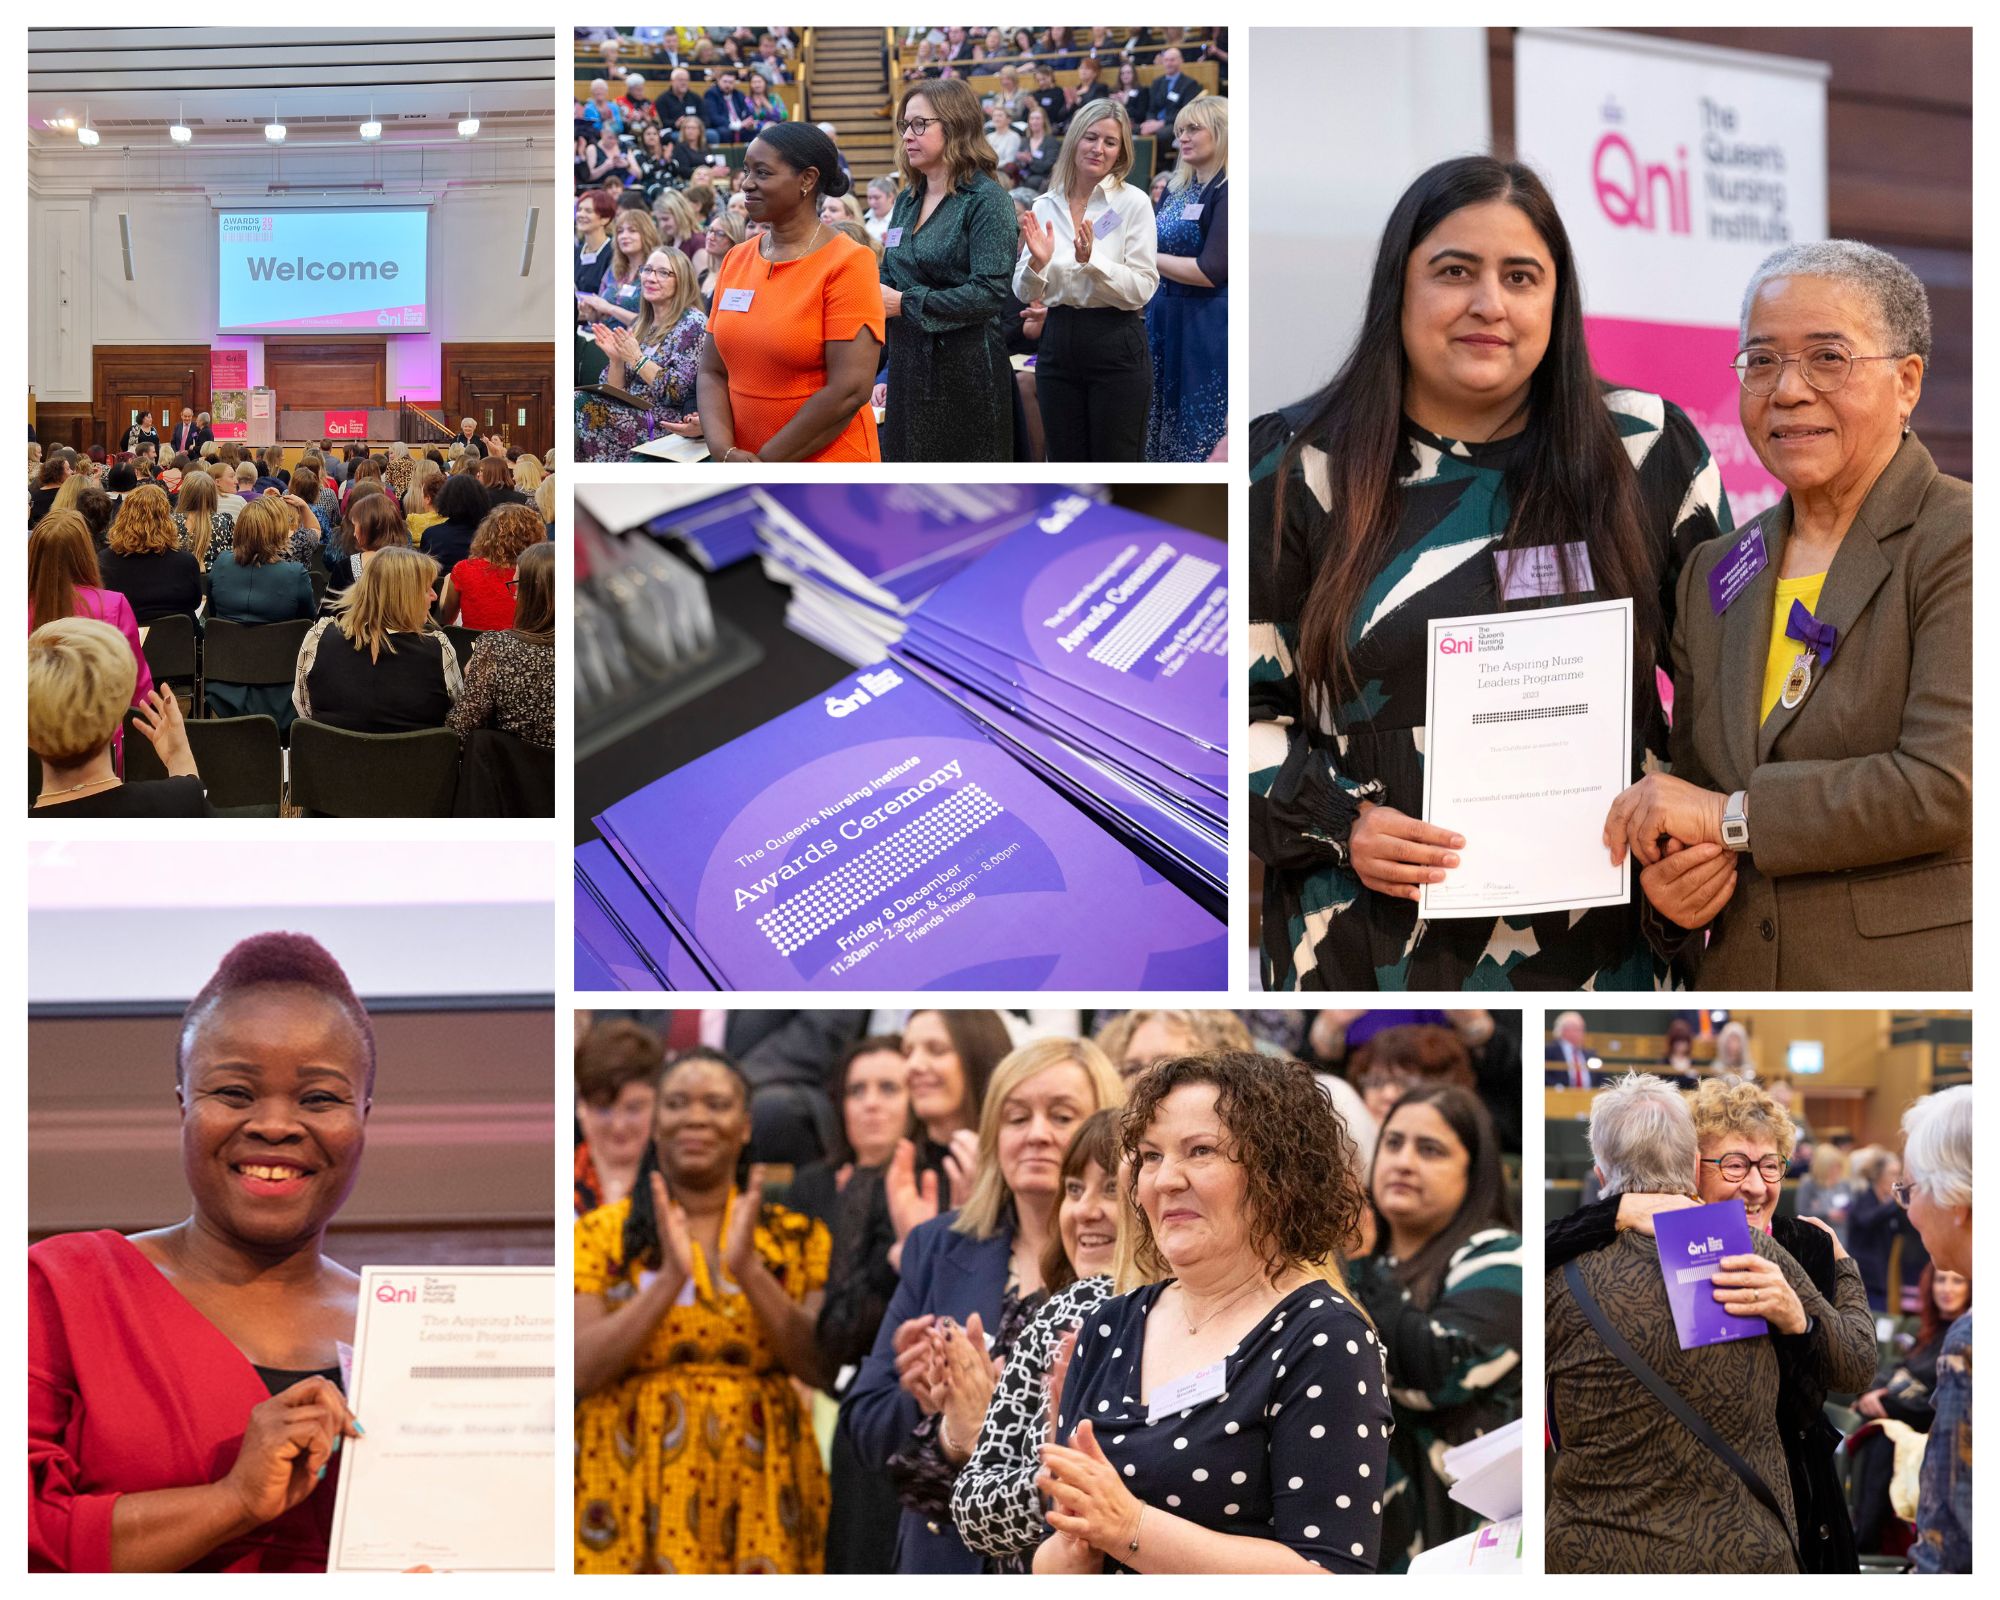 A photo collage from the QNI awards ceremony featuring attendees and awardees